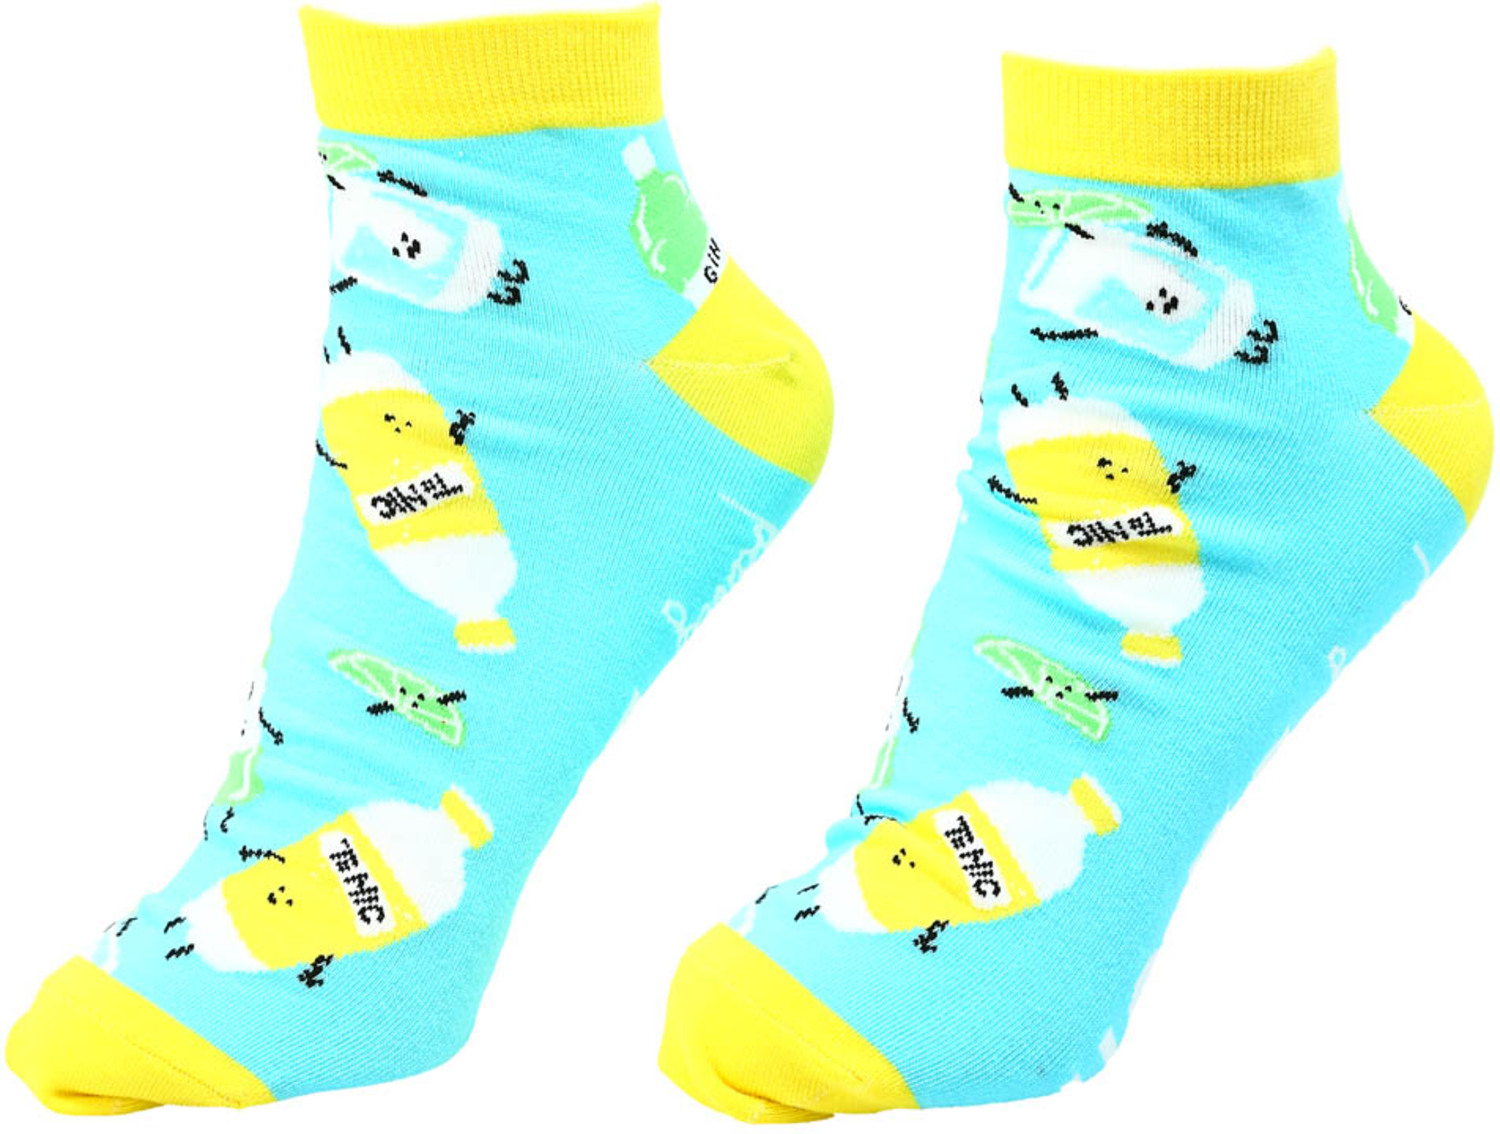 Gin and Tonic by Late Night Last Call - Gin and Tonic - Cotton Blend Ankle Socks